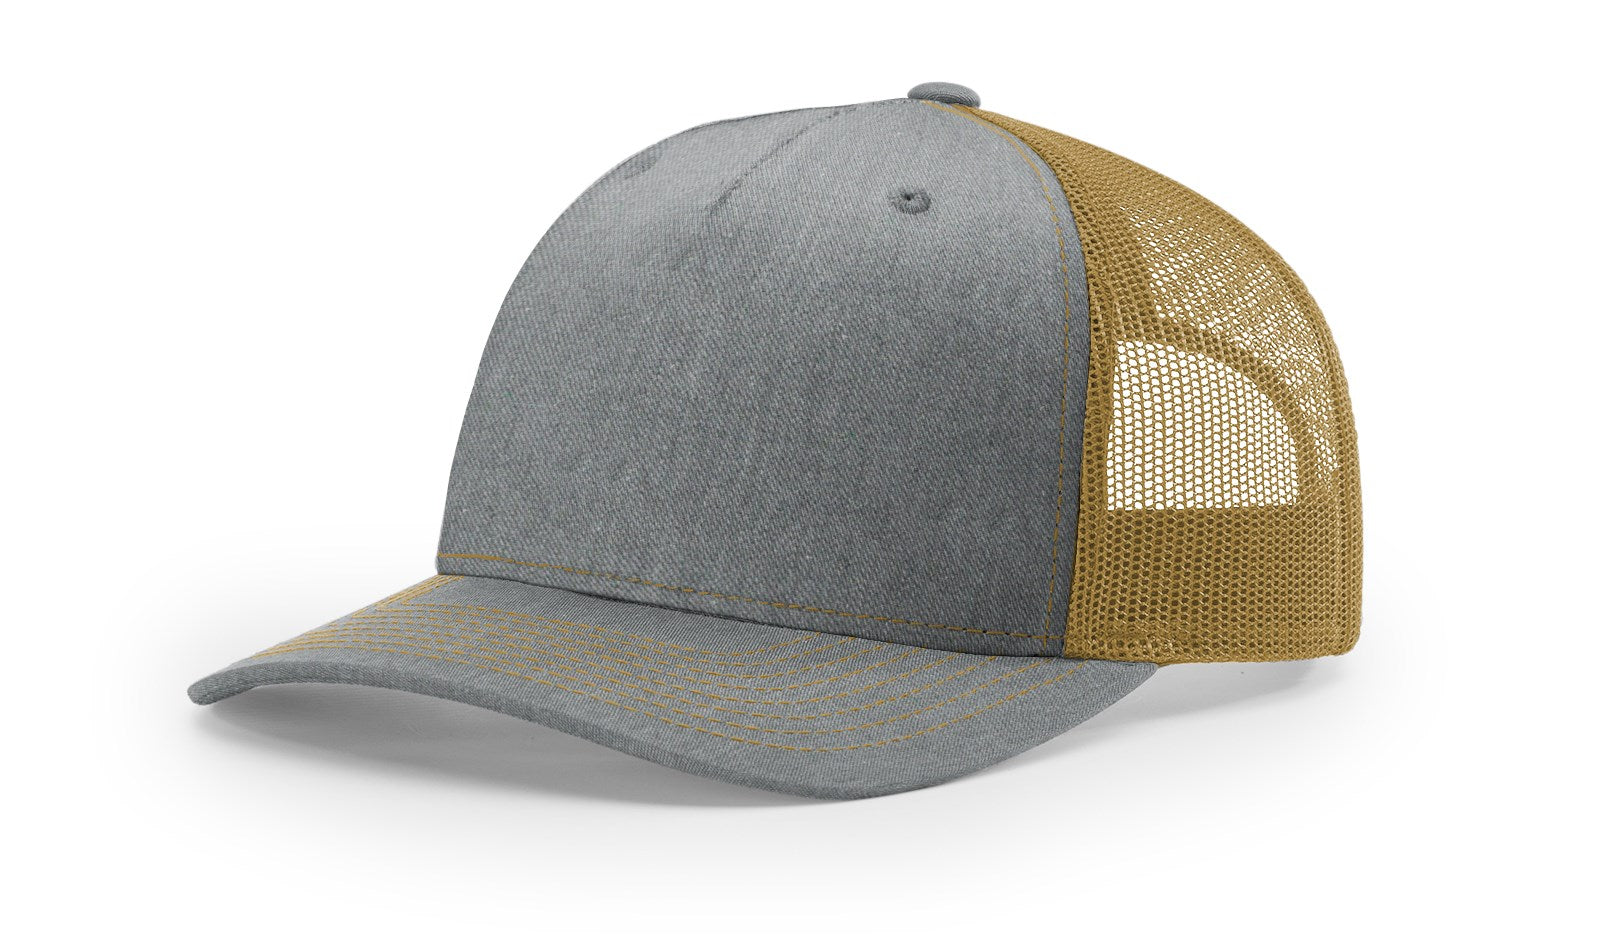 Heather Grey/Amber Gold color variant